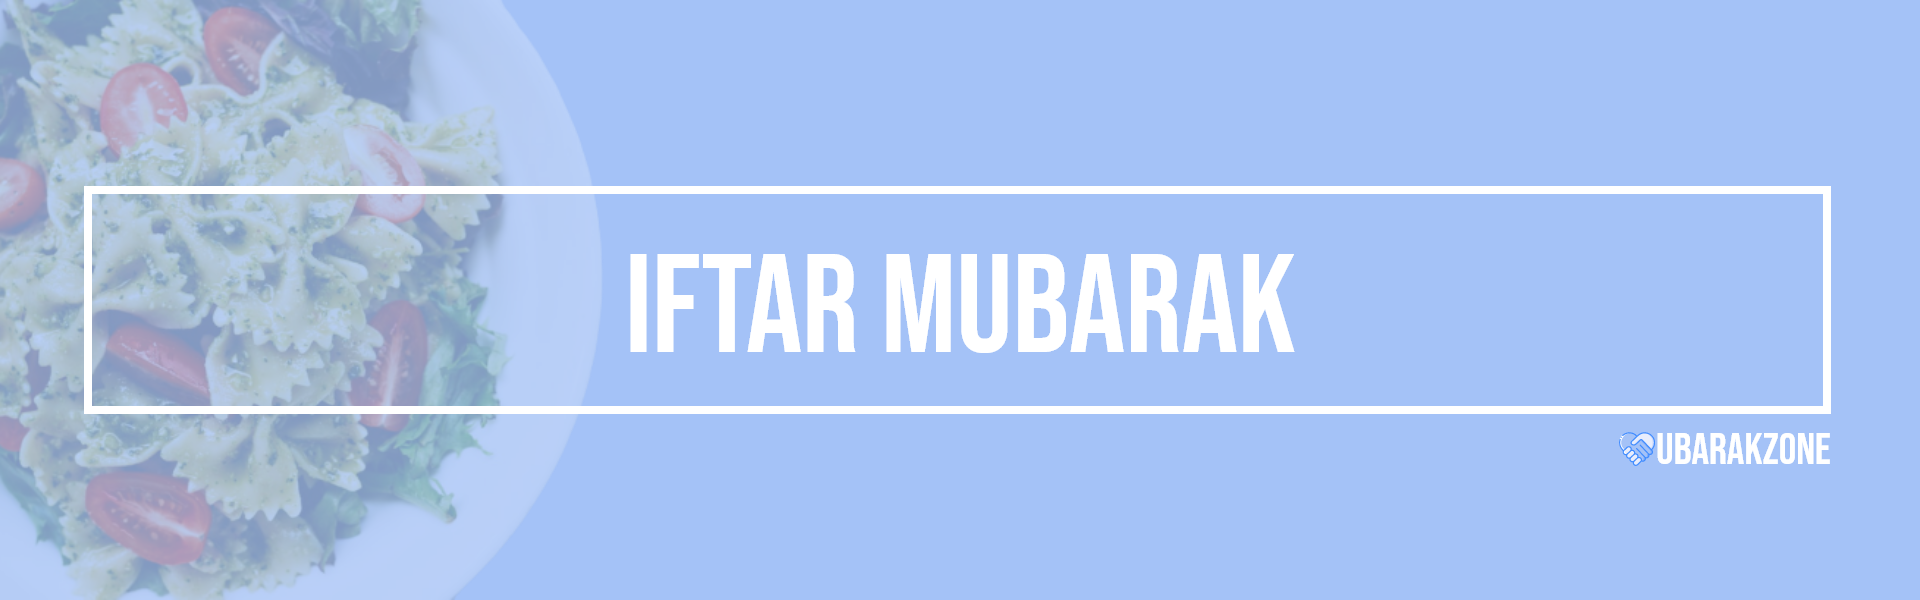 iftar mubarak wishes messages